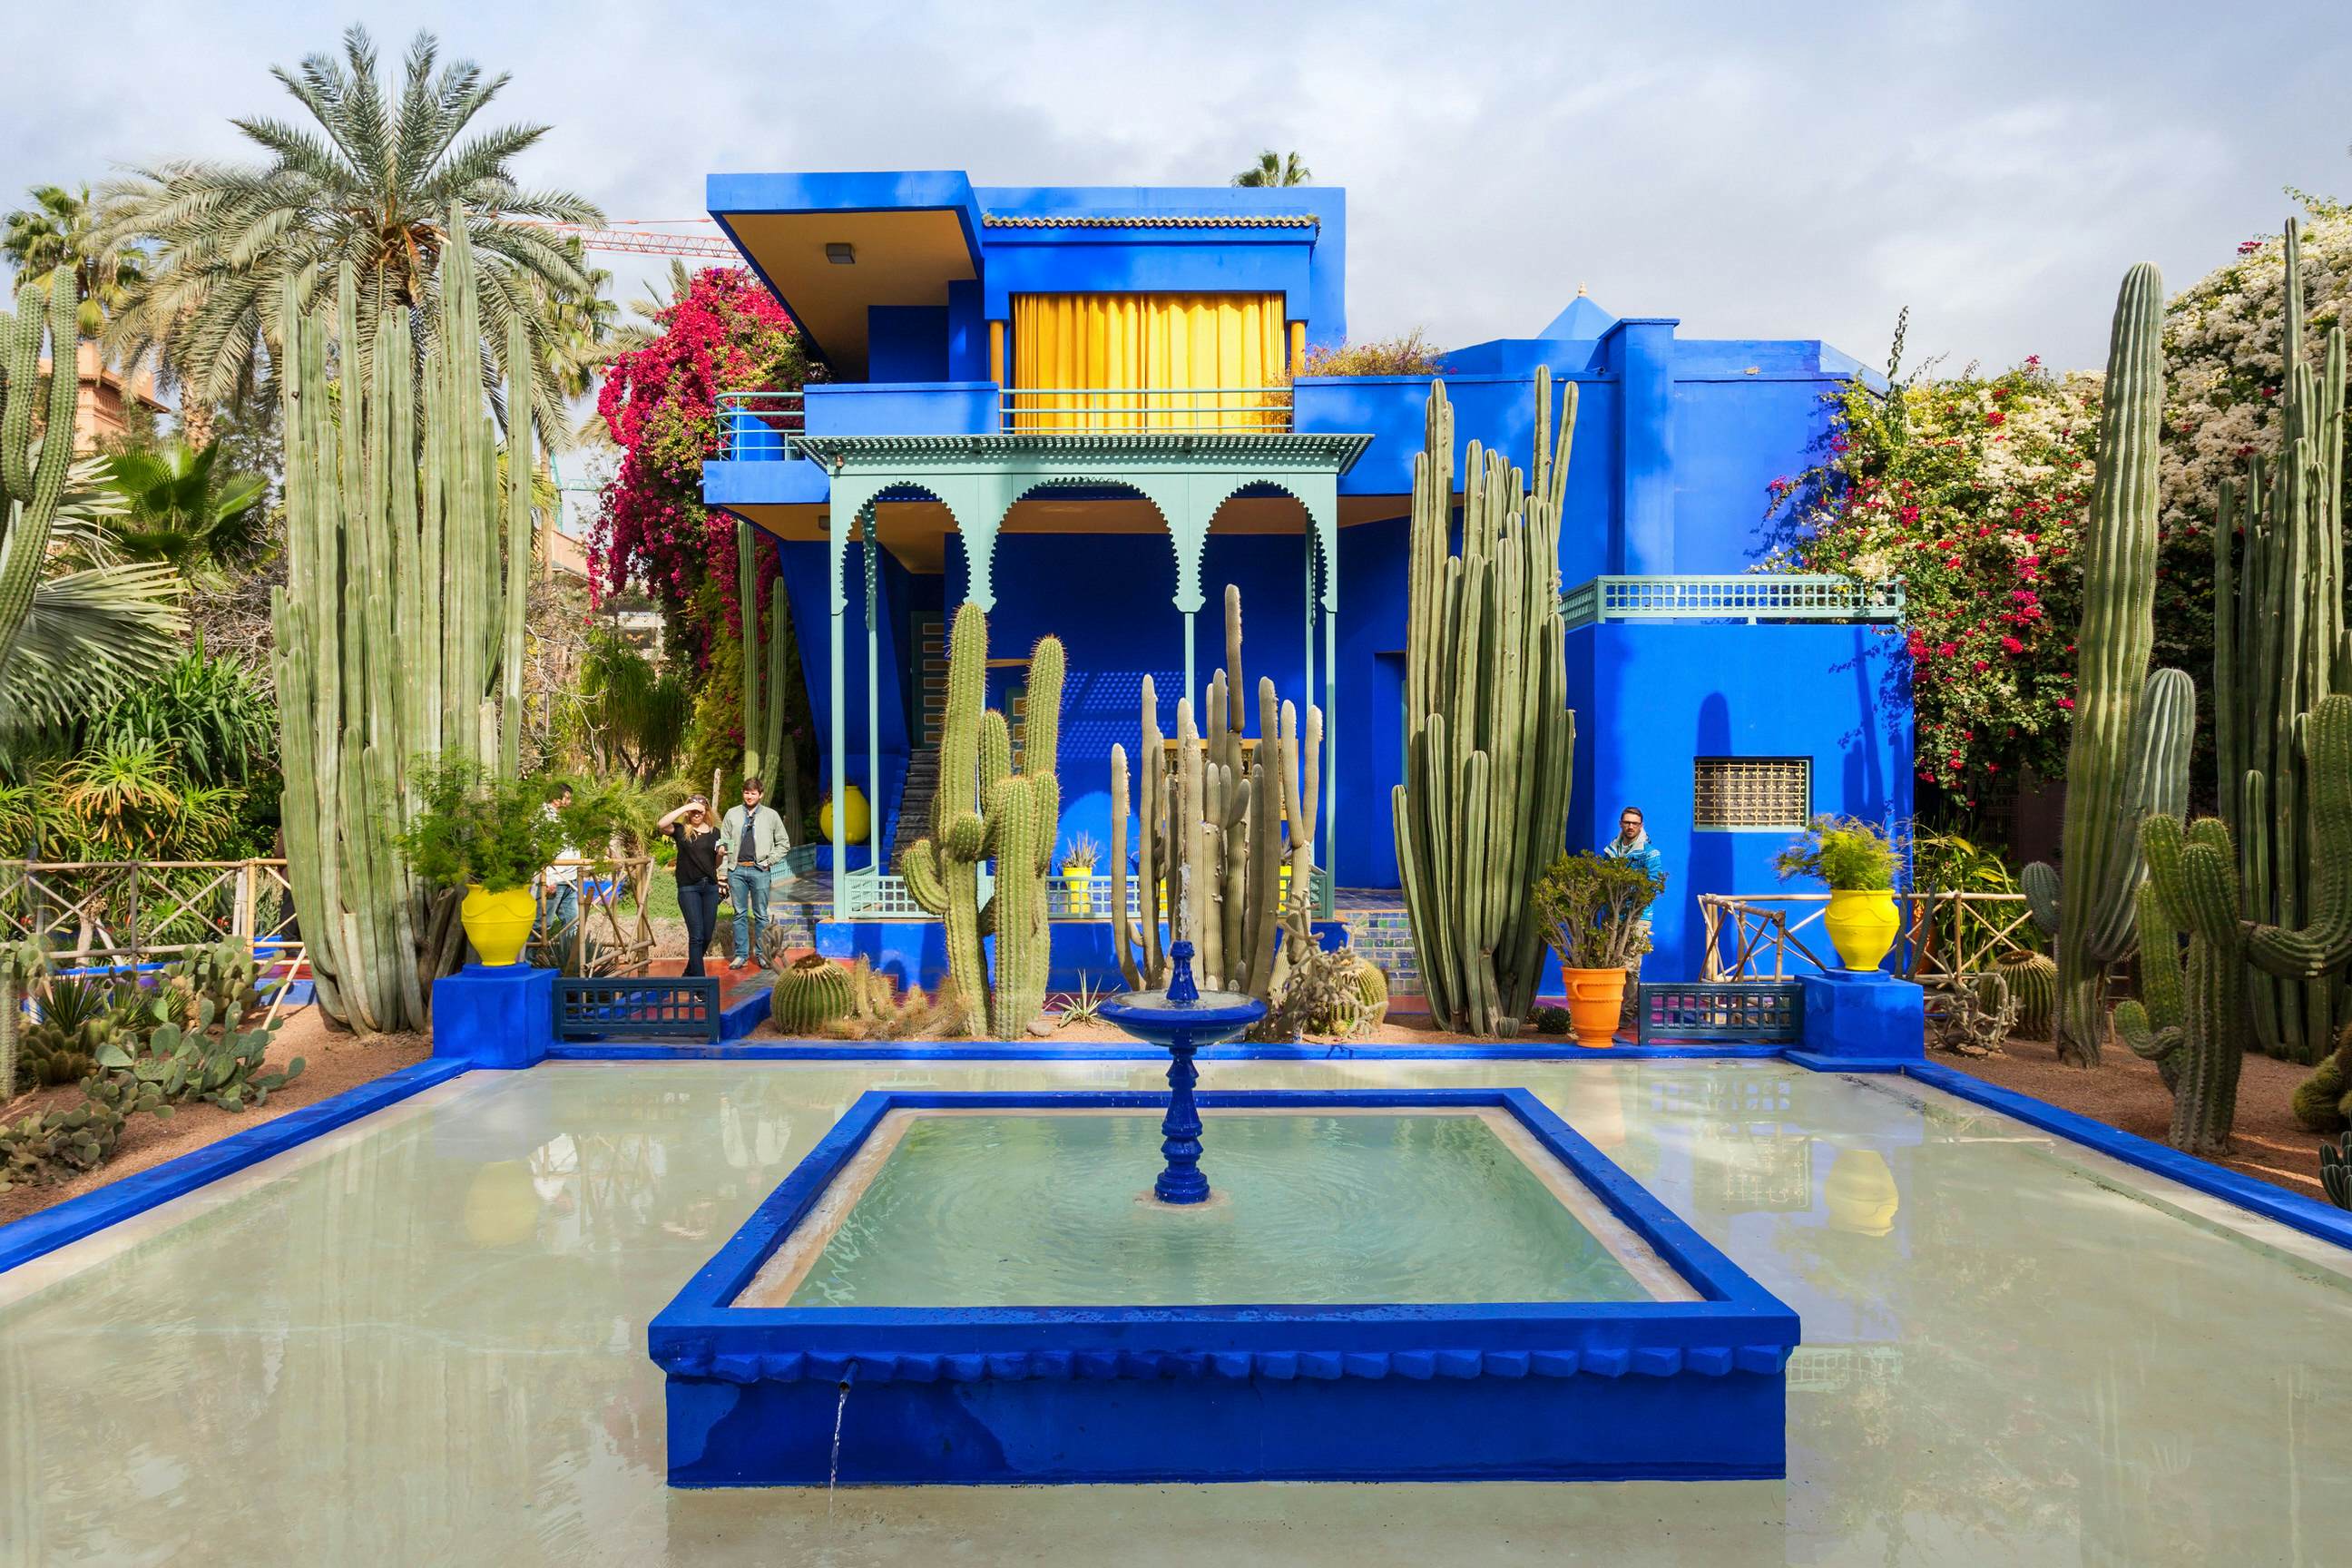 How to beat the queues and crowds at YSL's Jardin Majorelle in Marrakesh -  Lonely Planet